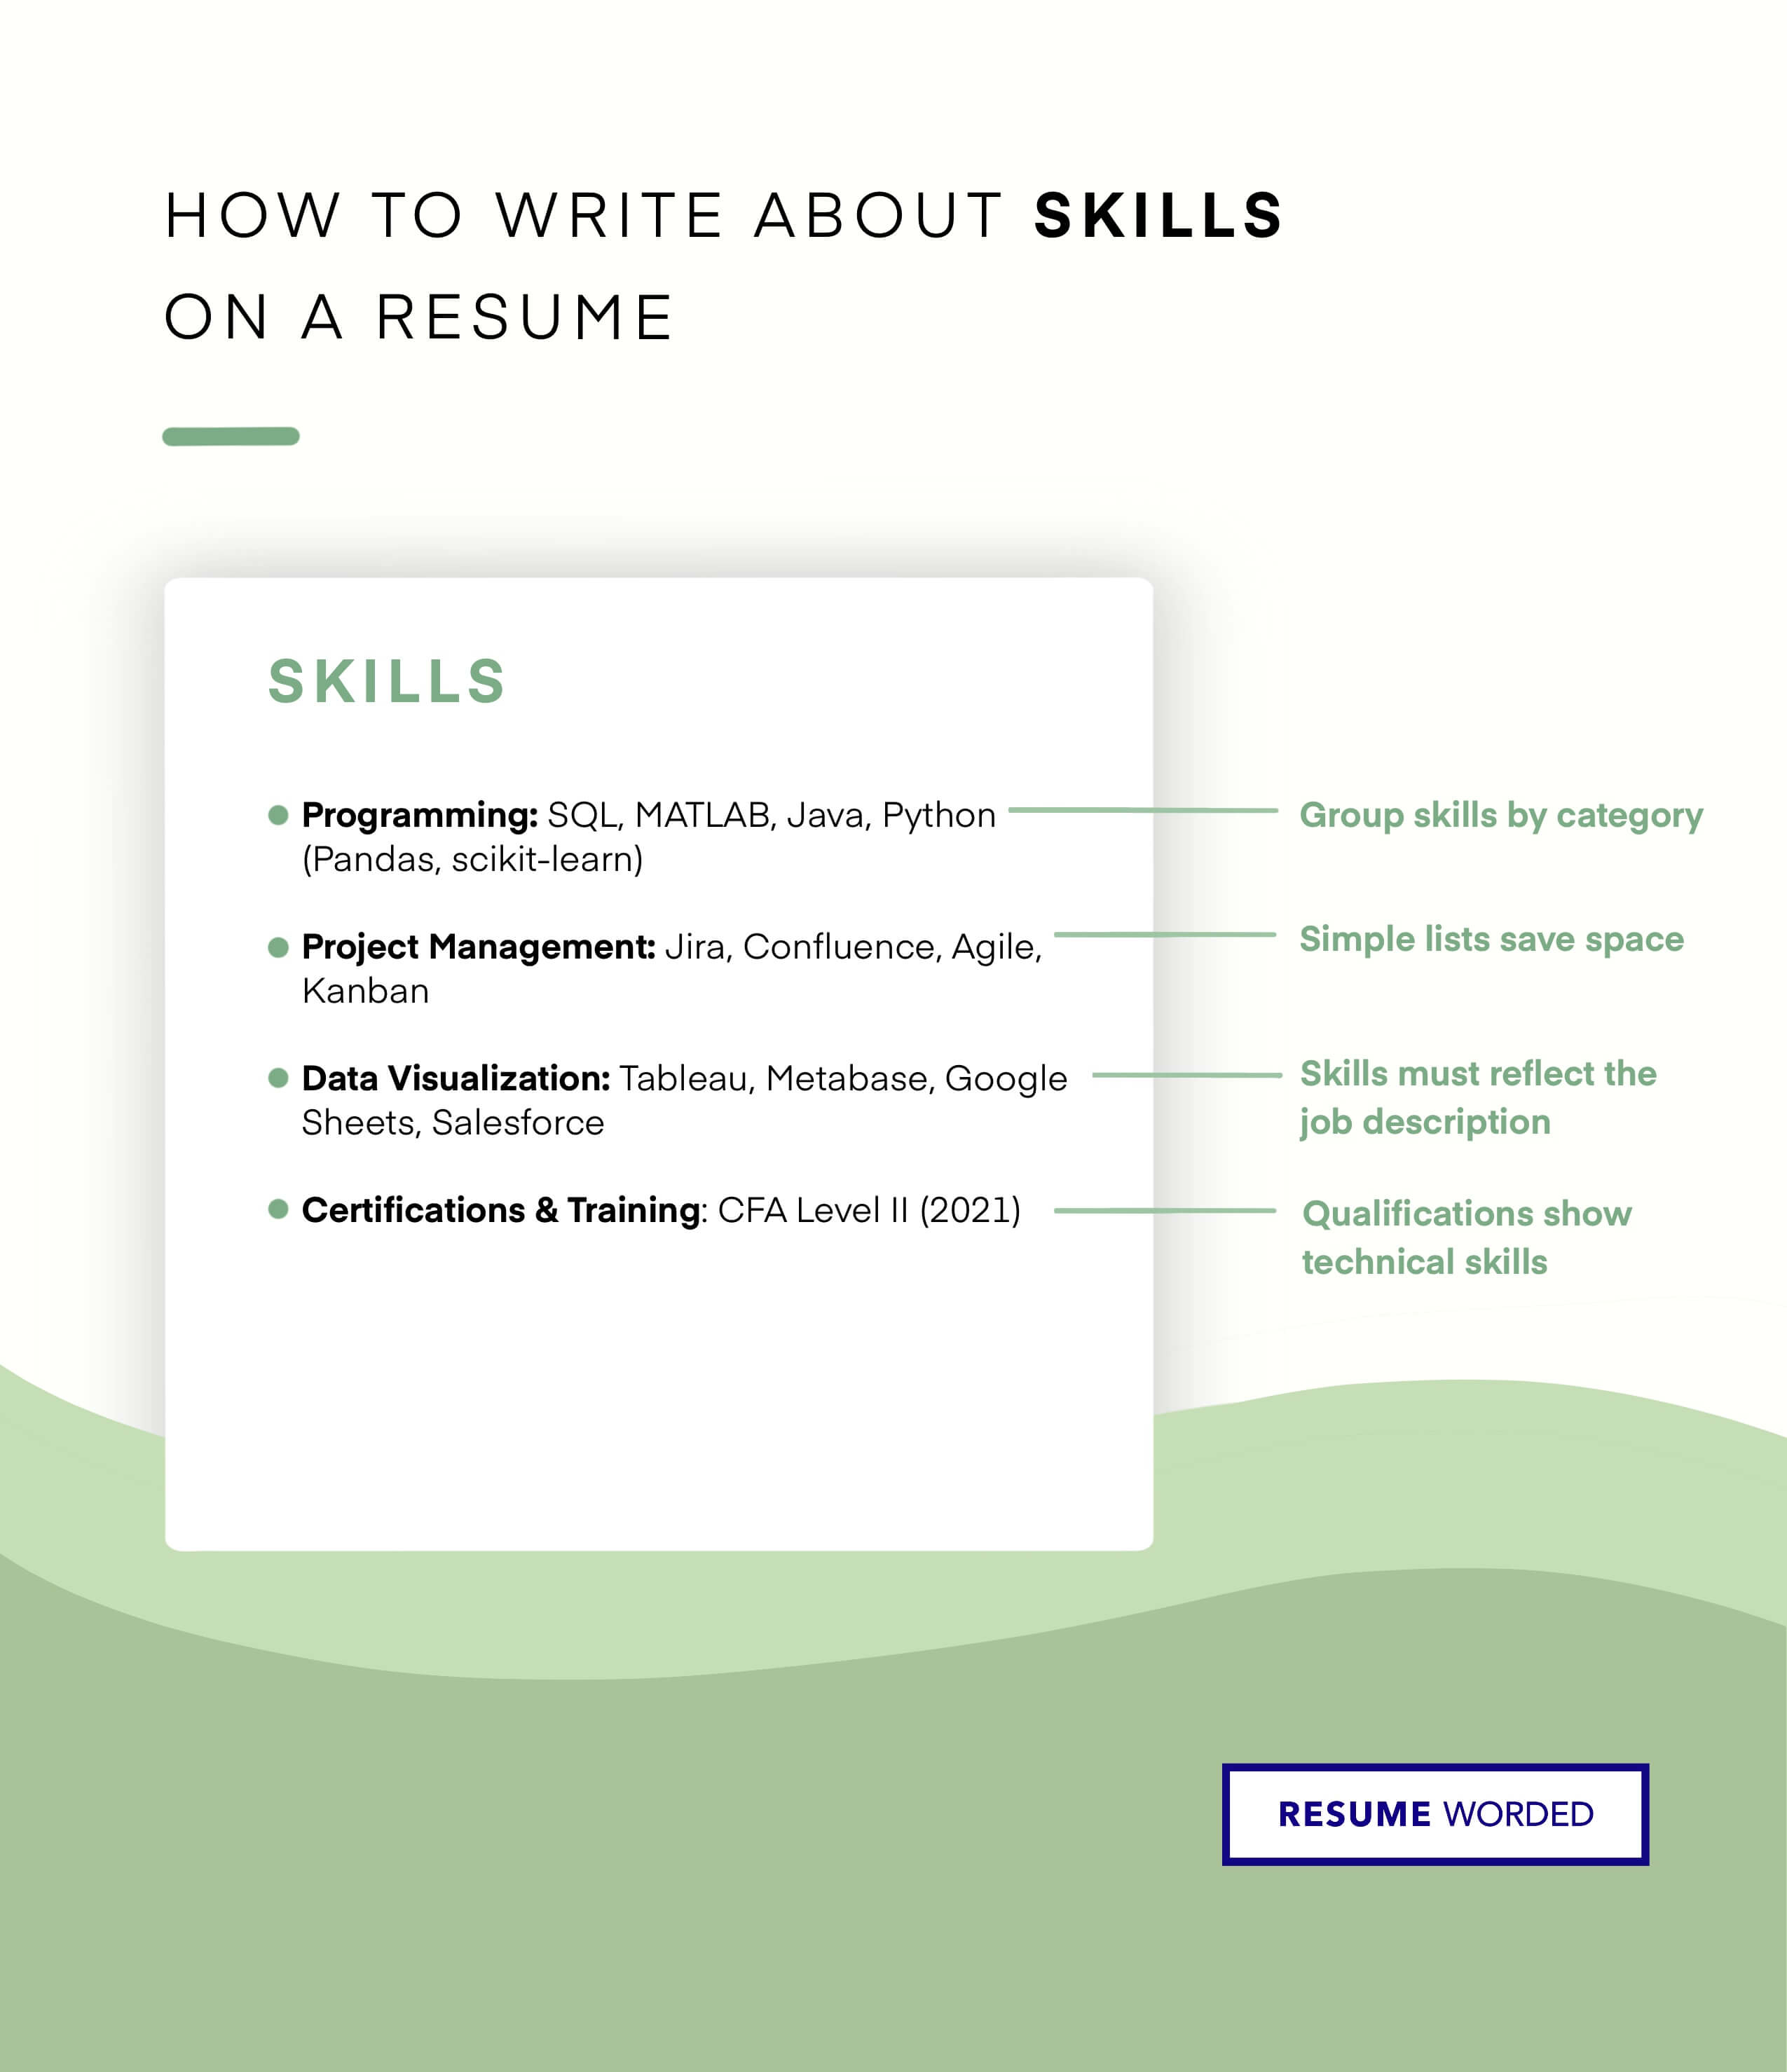 Show competency in using Microsoft tools. - Microsoft Program Manager Resume